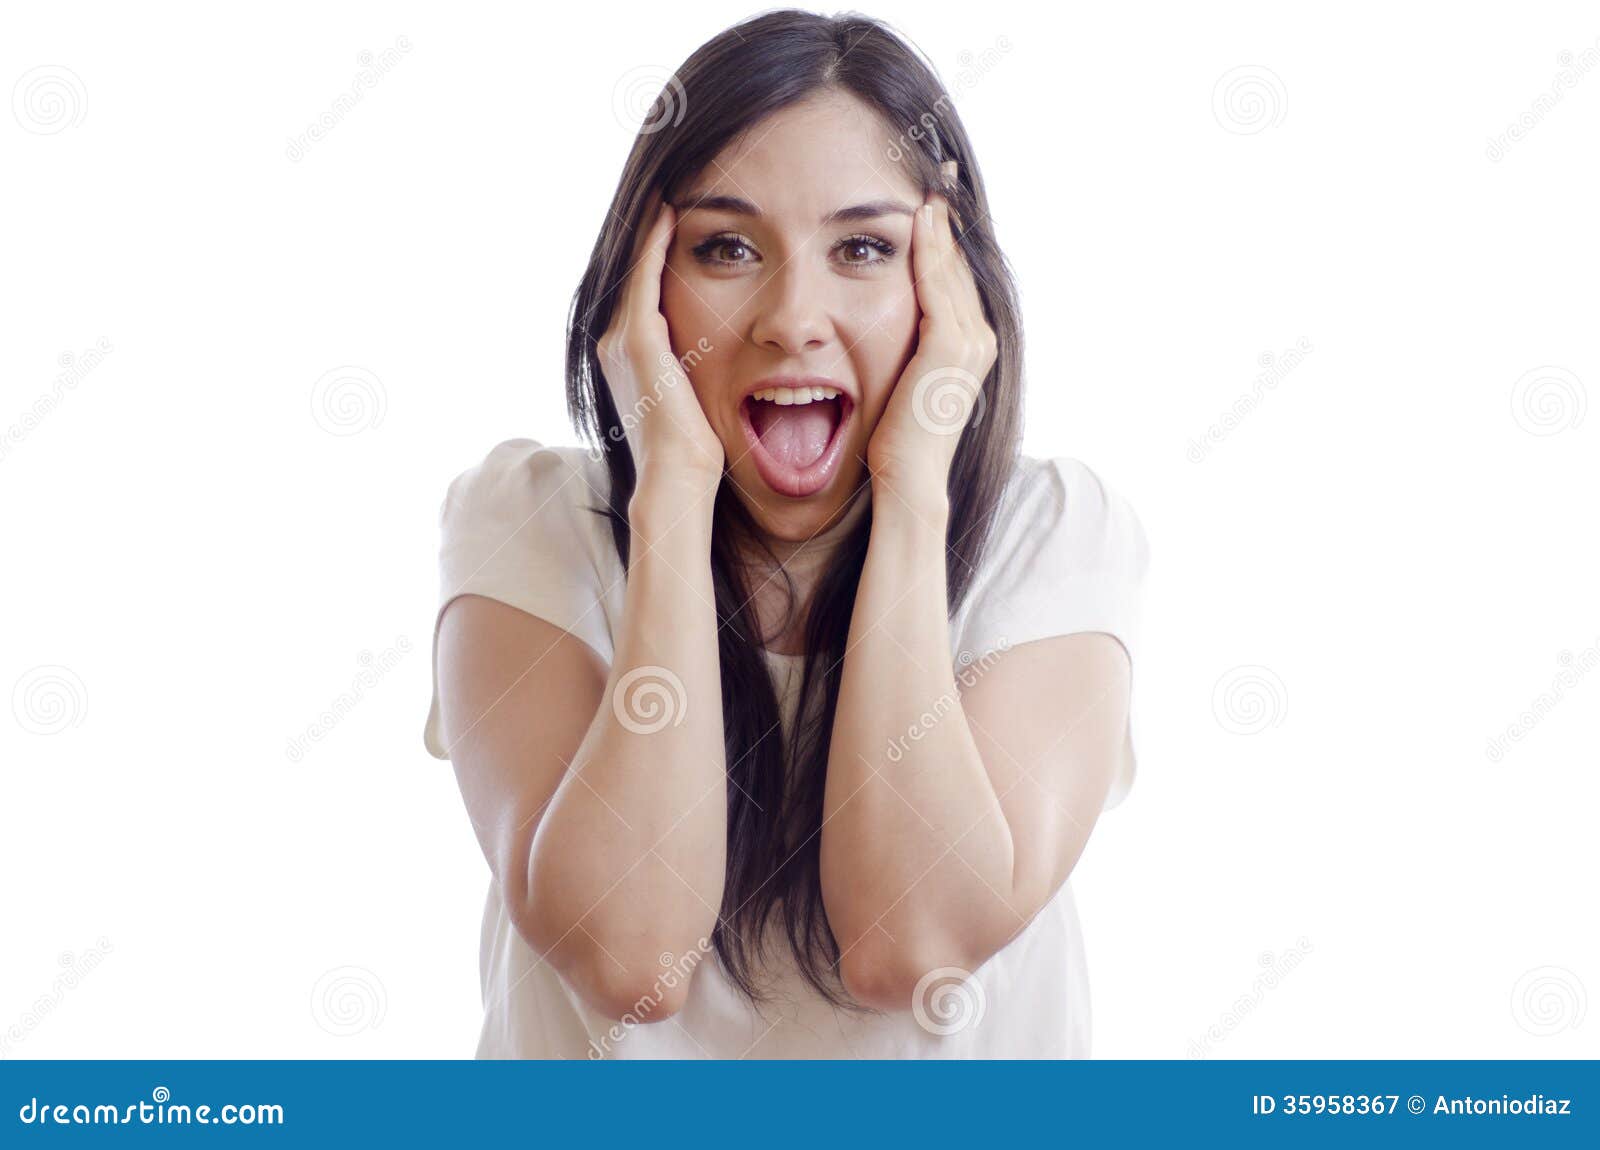 Cute girl acting surprised stock image. Image of white - 35958367